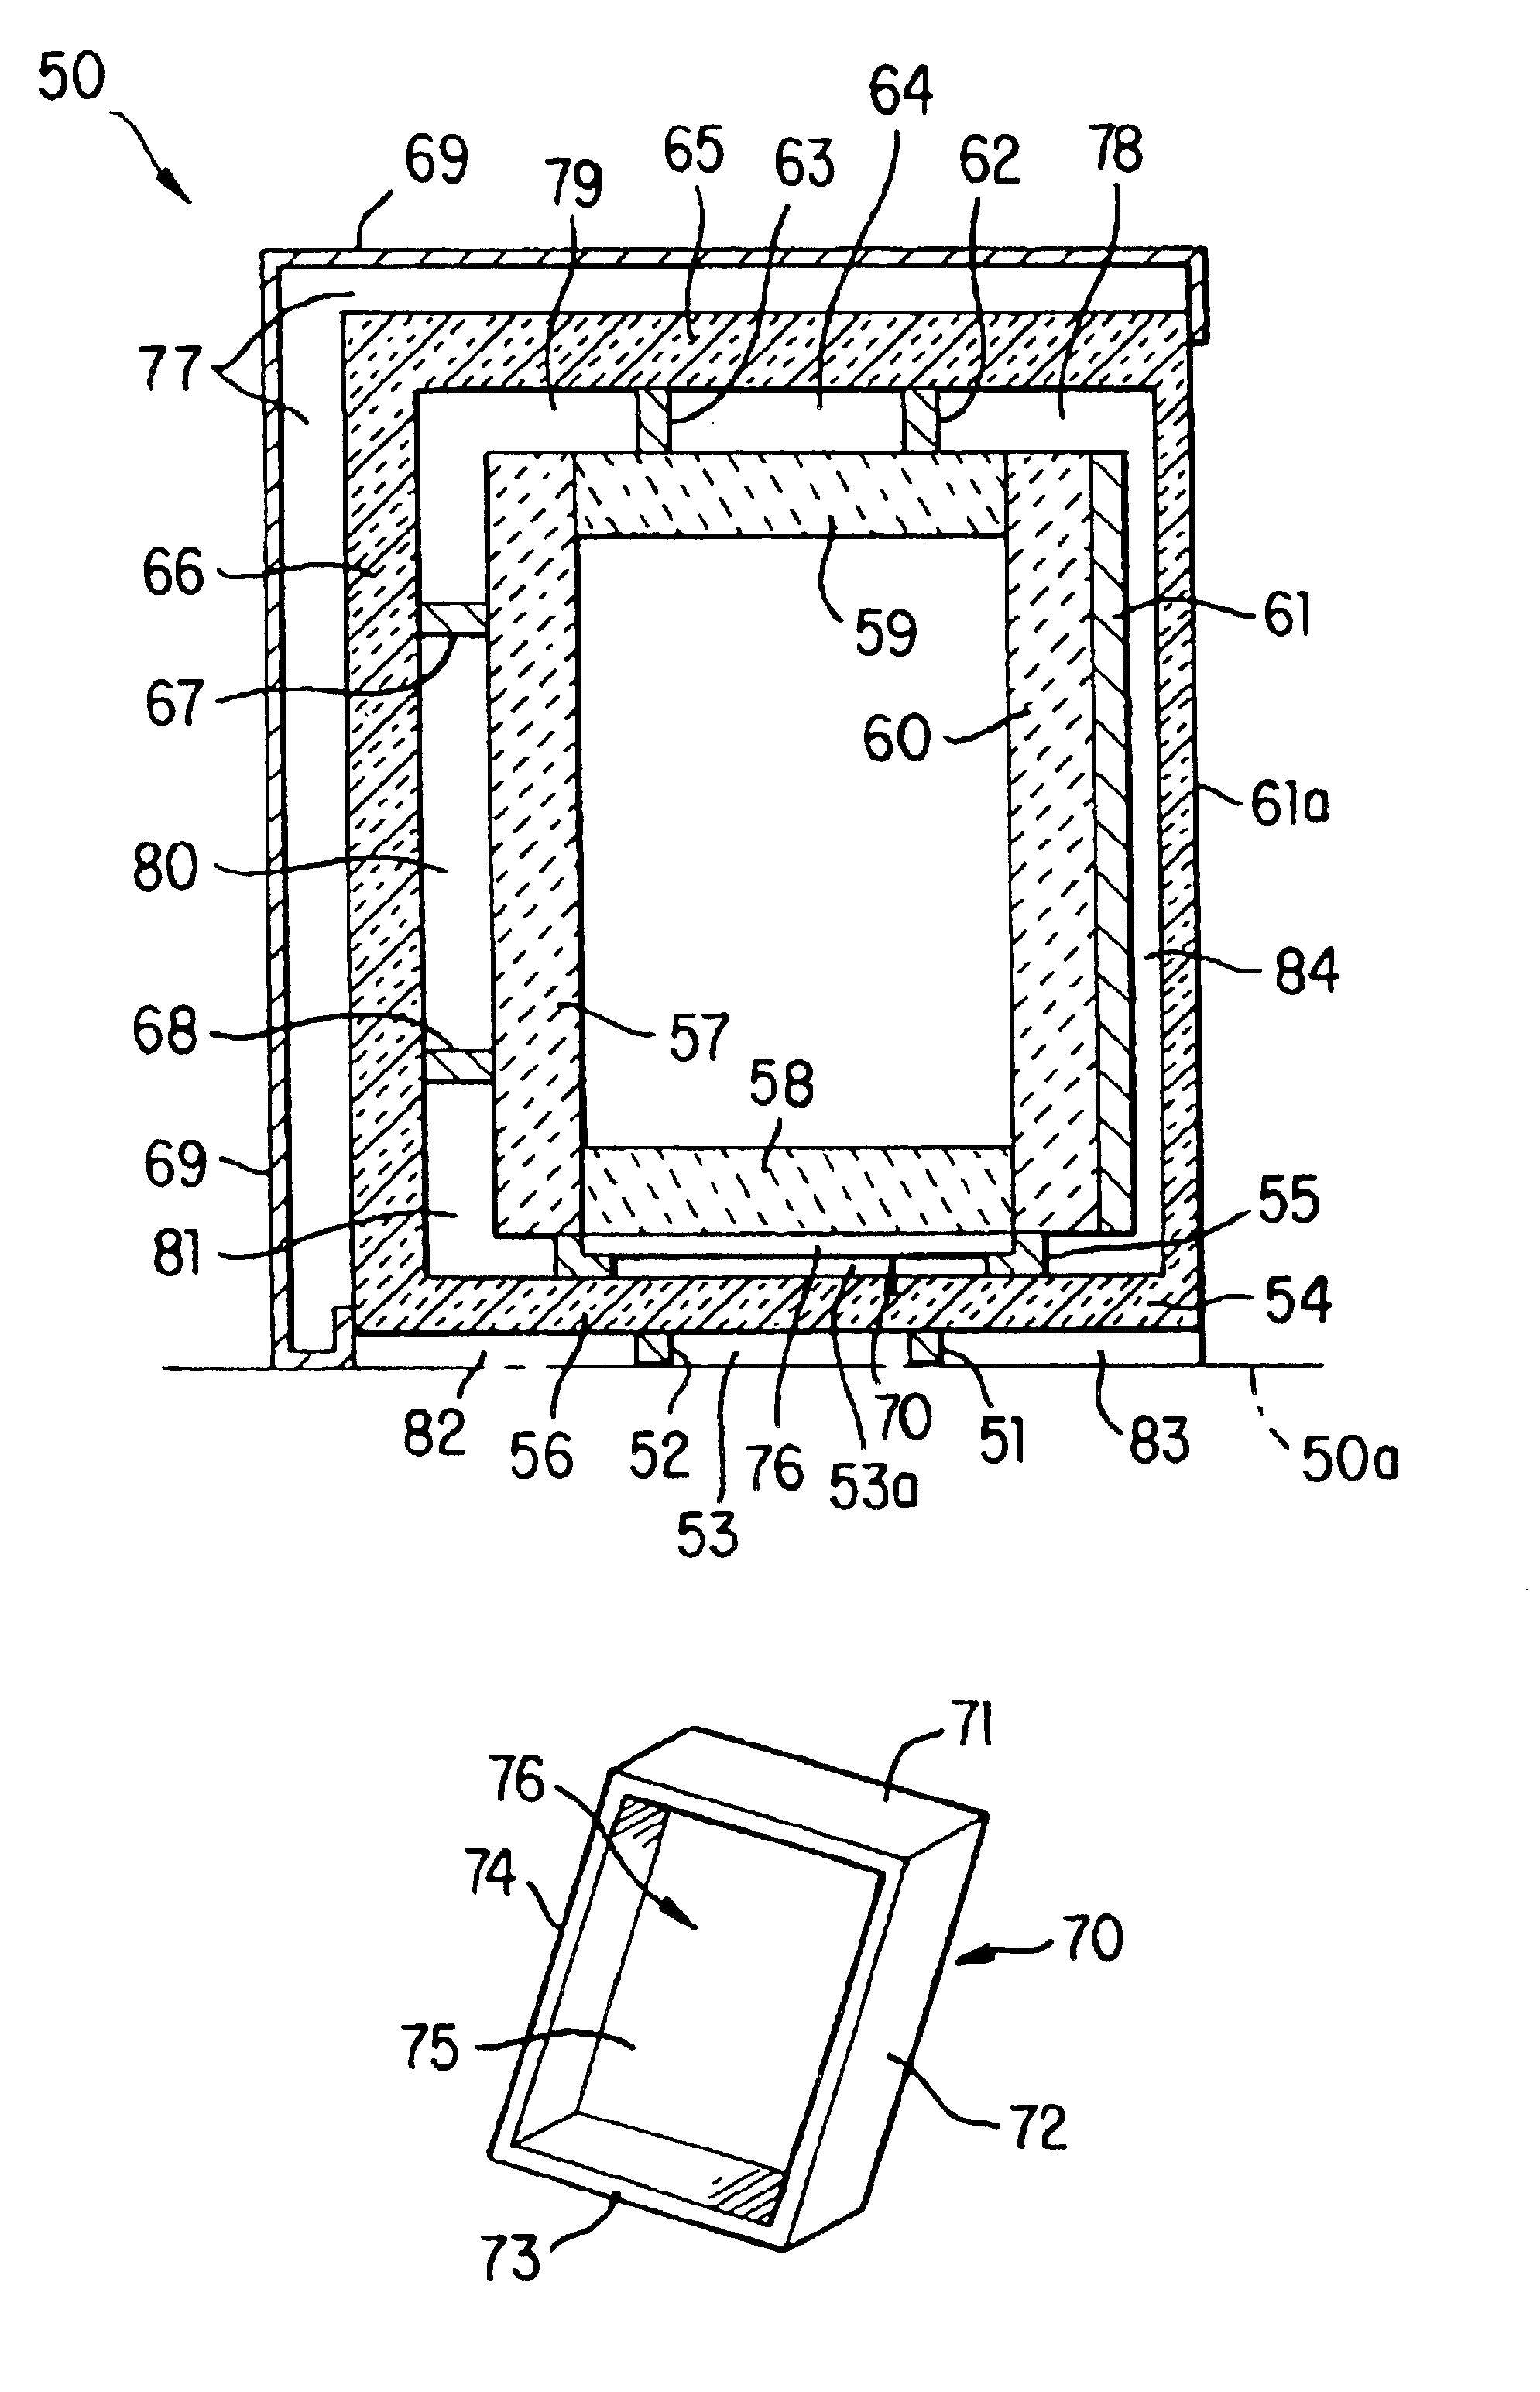 Electrical energy conserving kiln method and apparatus